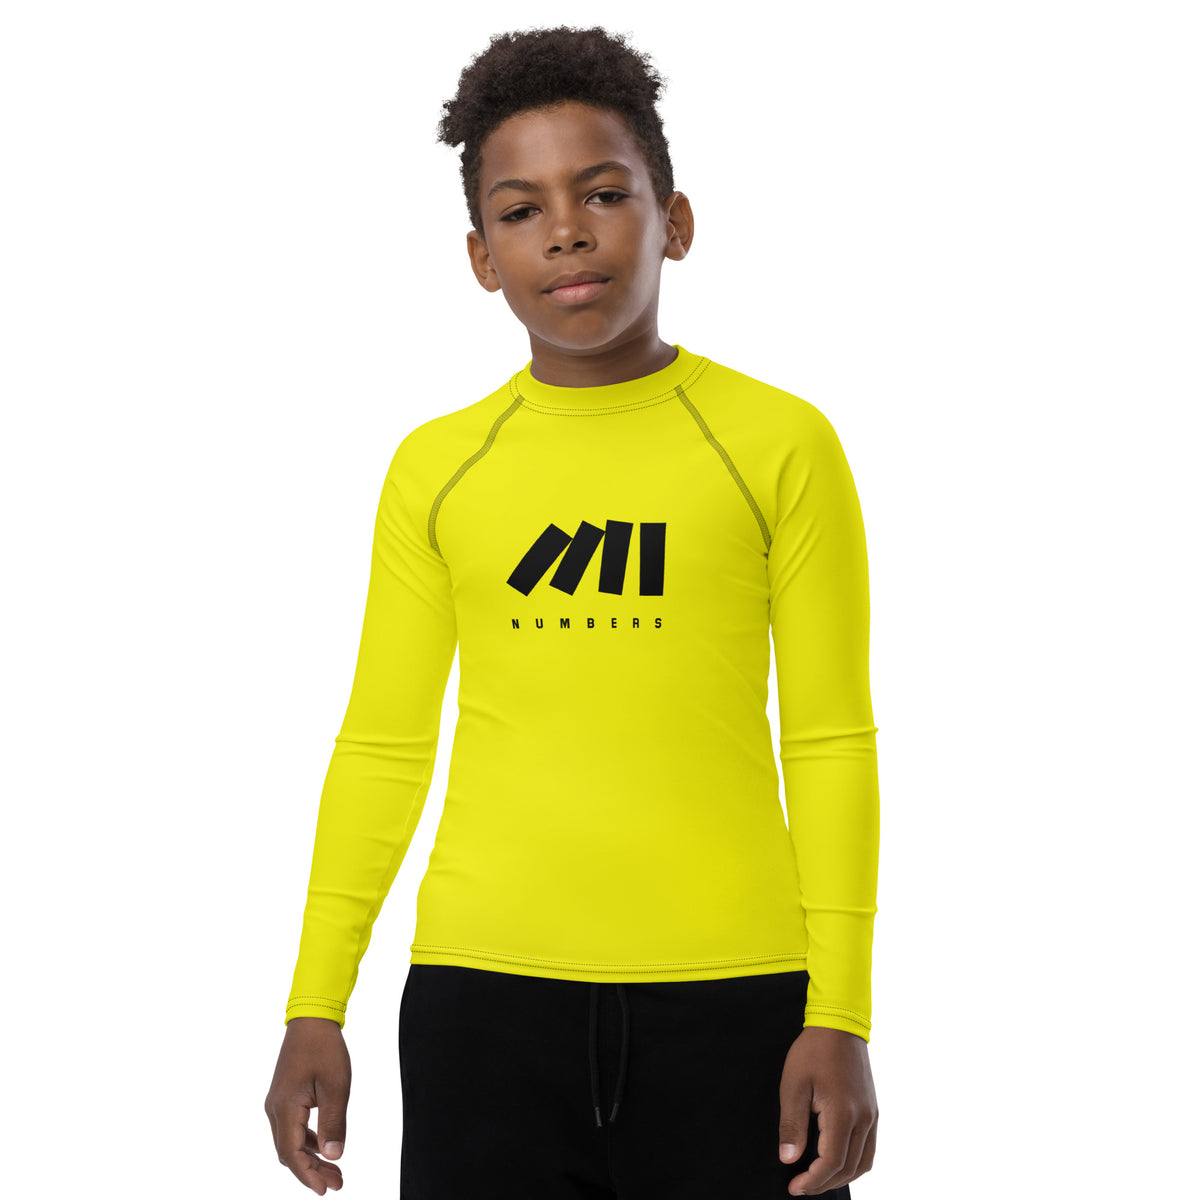 Youper Youth Boys & Girls Thermal Compression Shirt, Long Sleeve